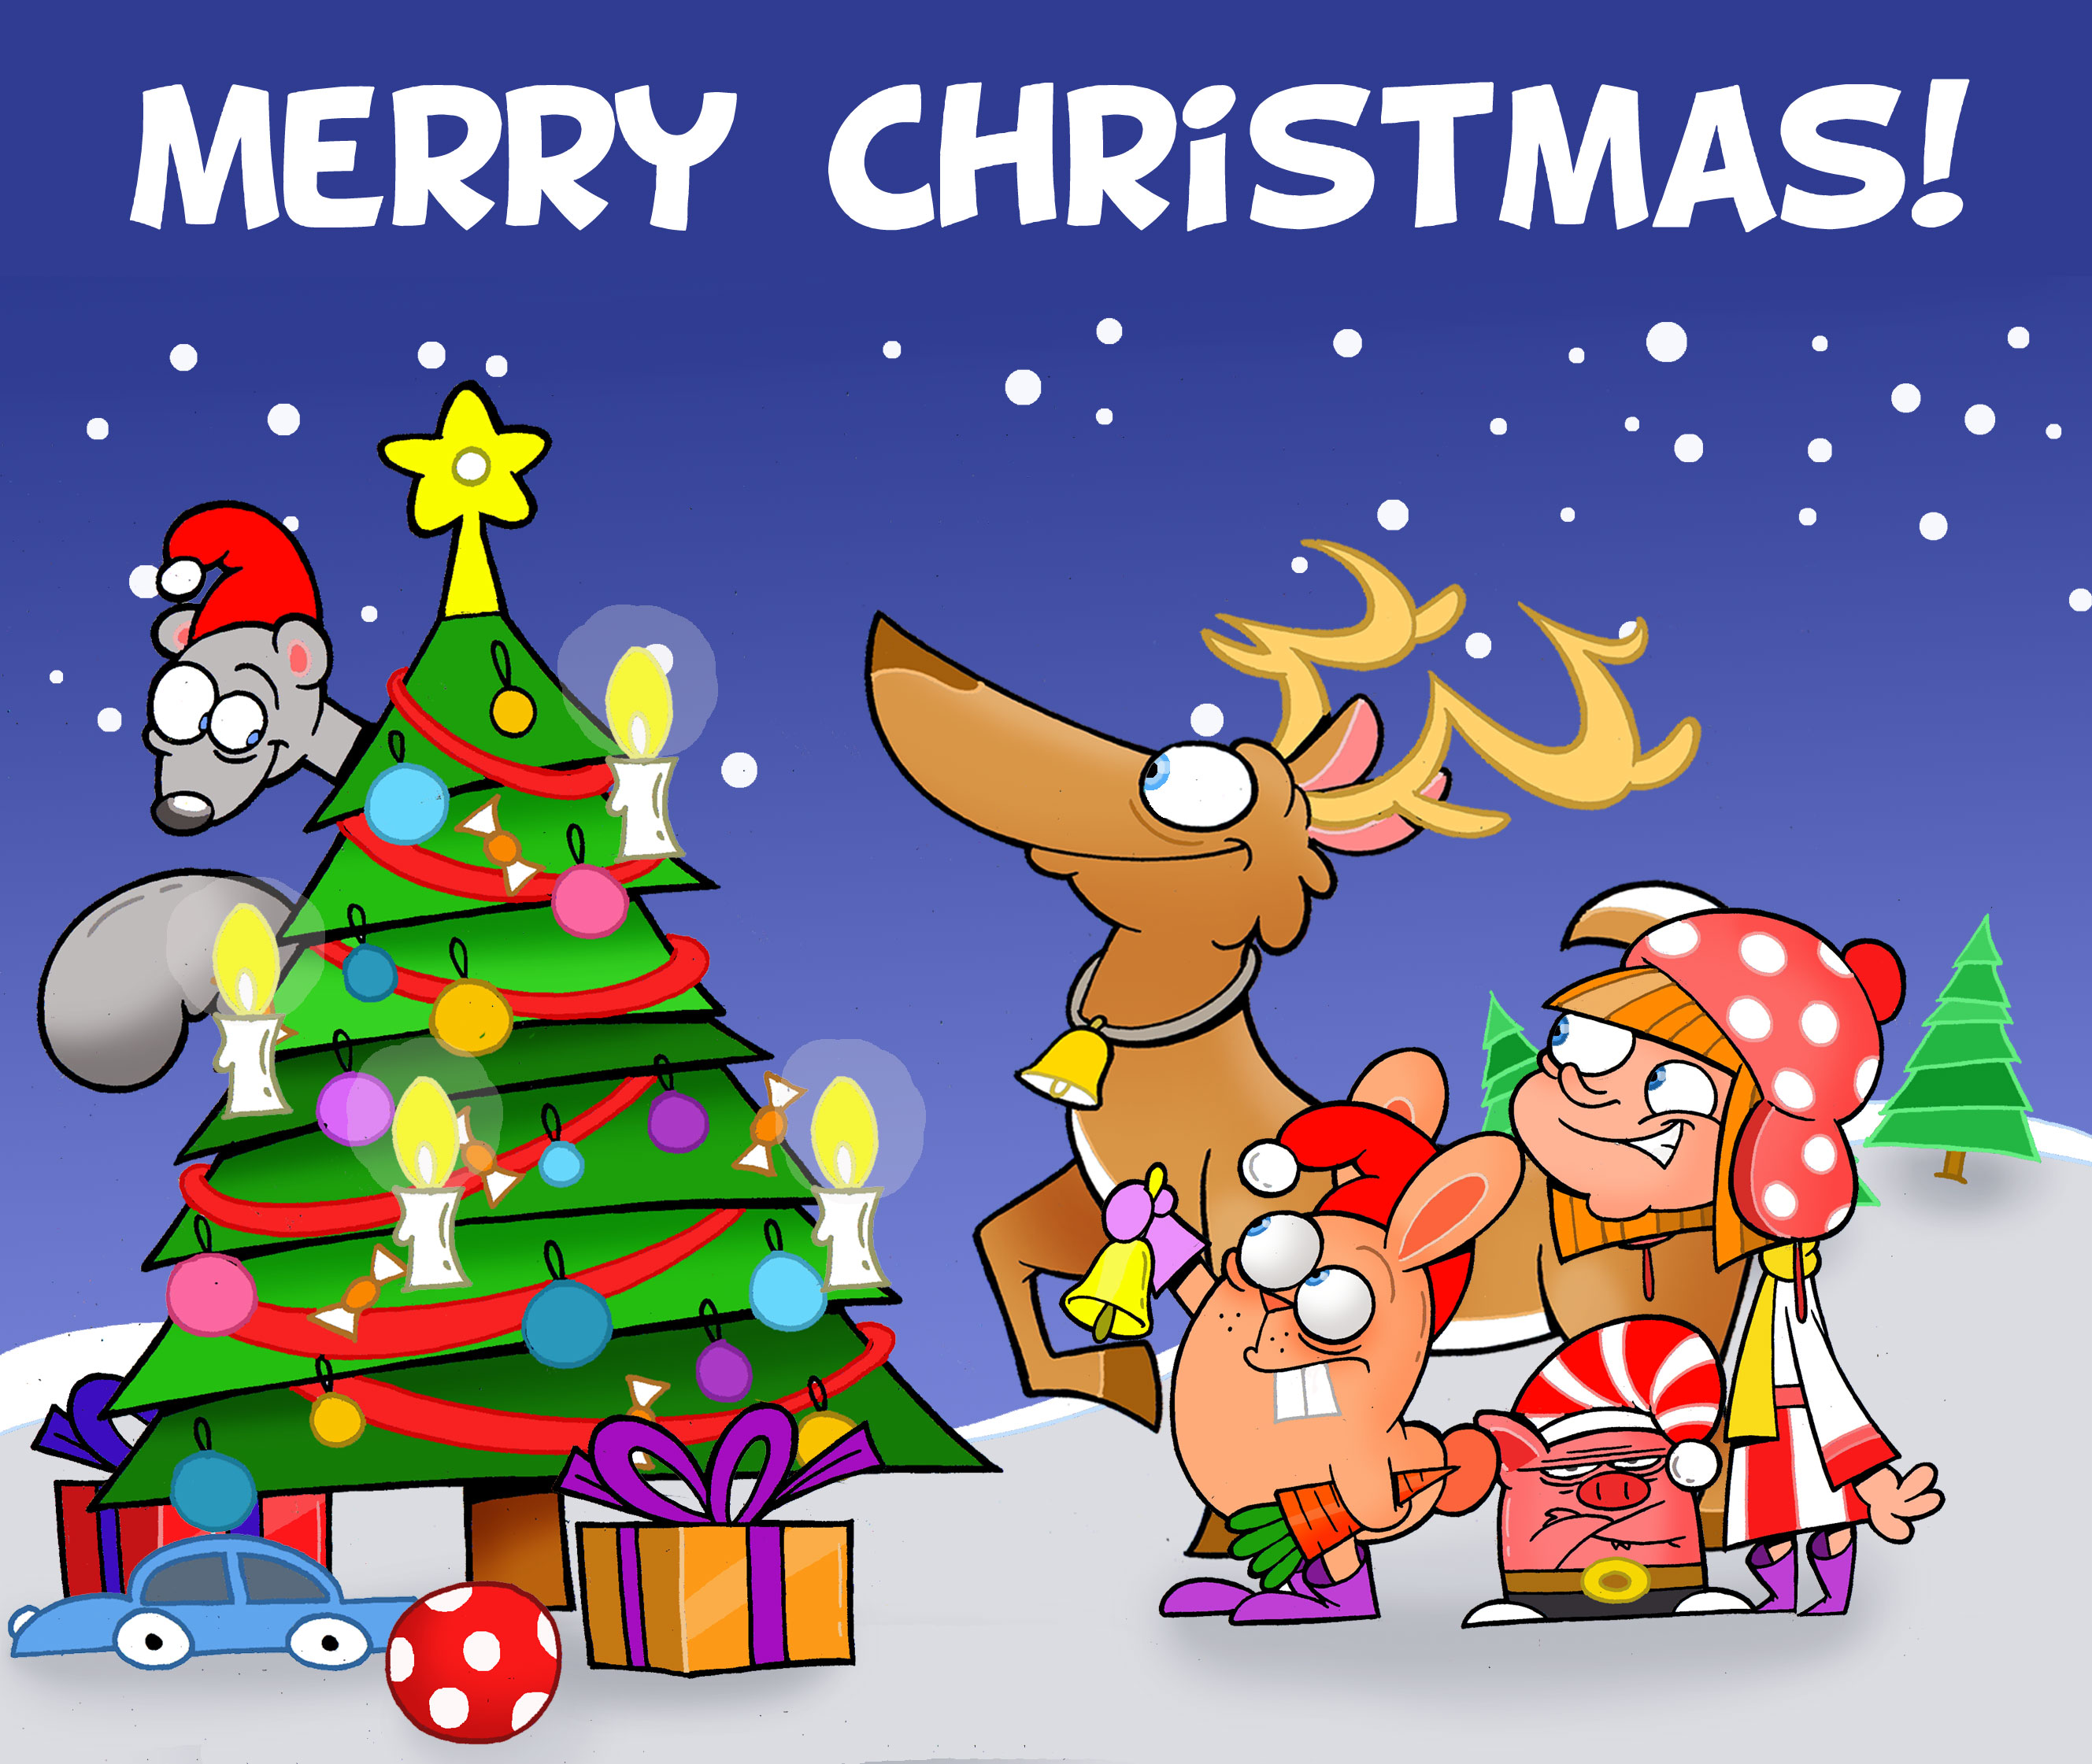 merry-christmas-free-illustration-my-gift-for-you-children-s-book-illustrator-tale